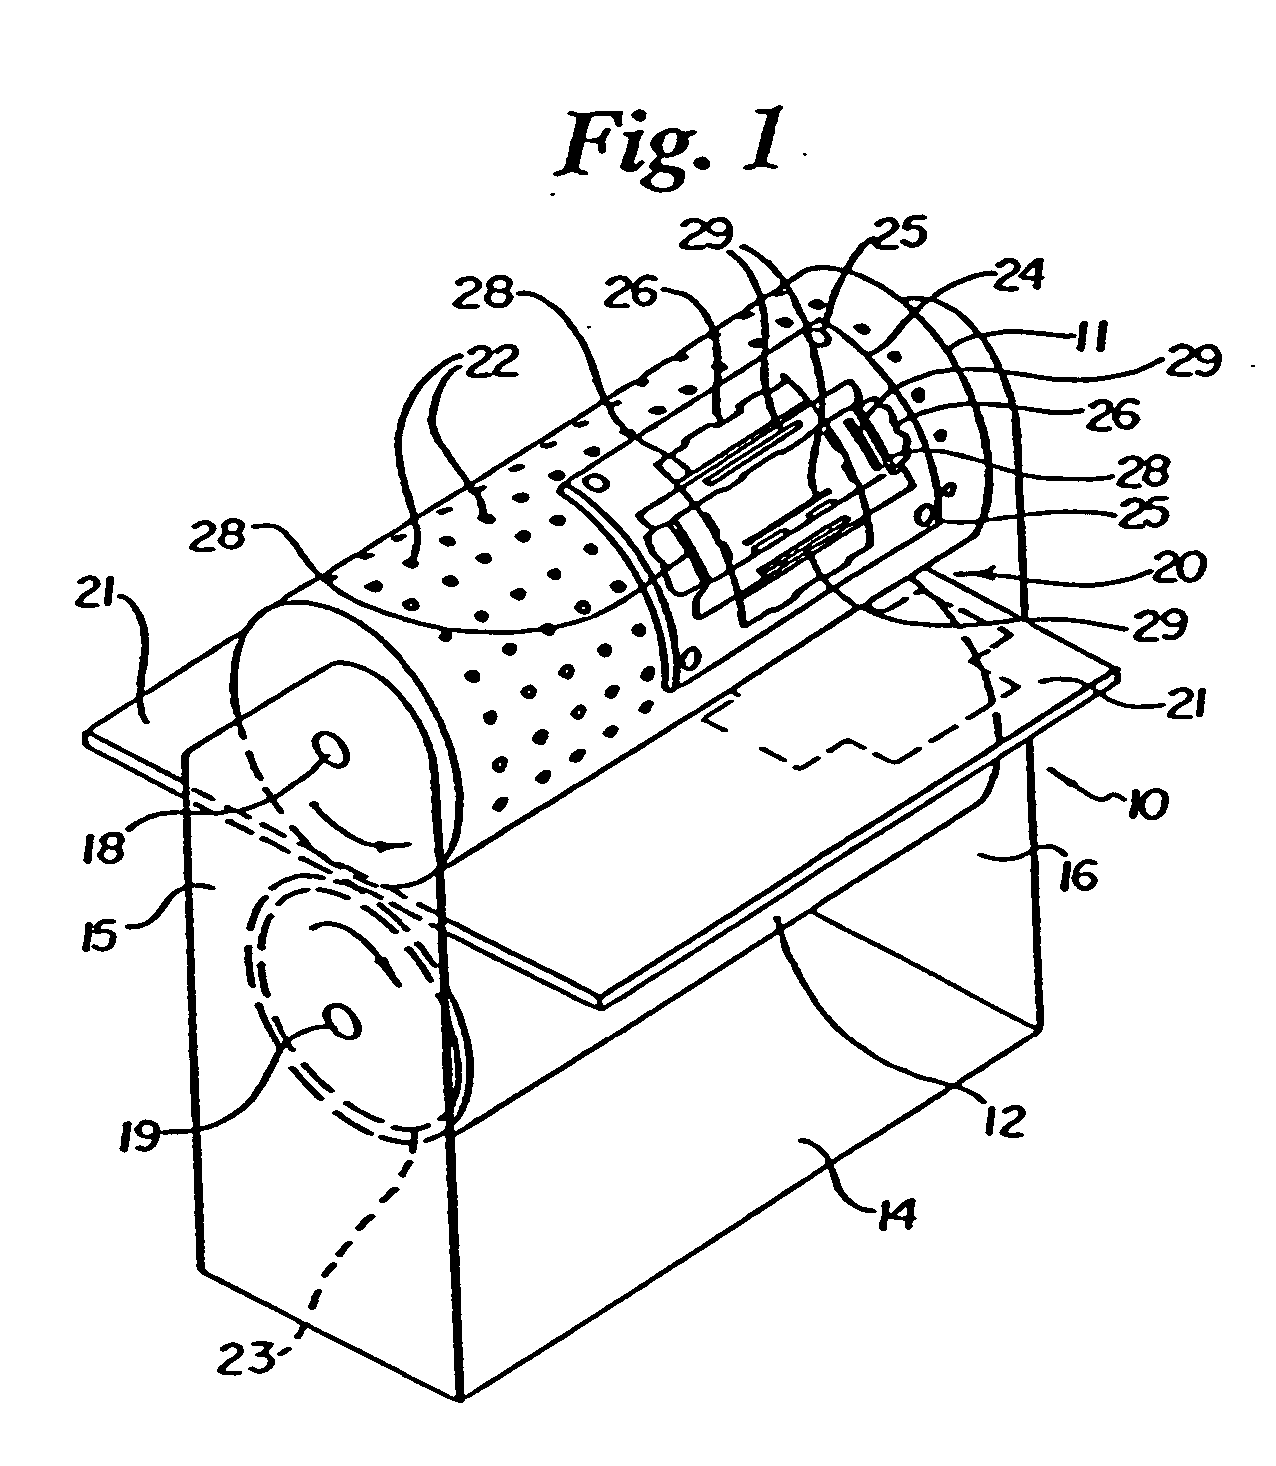 Folding score and method and apparatus for forming the same